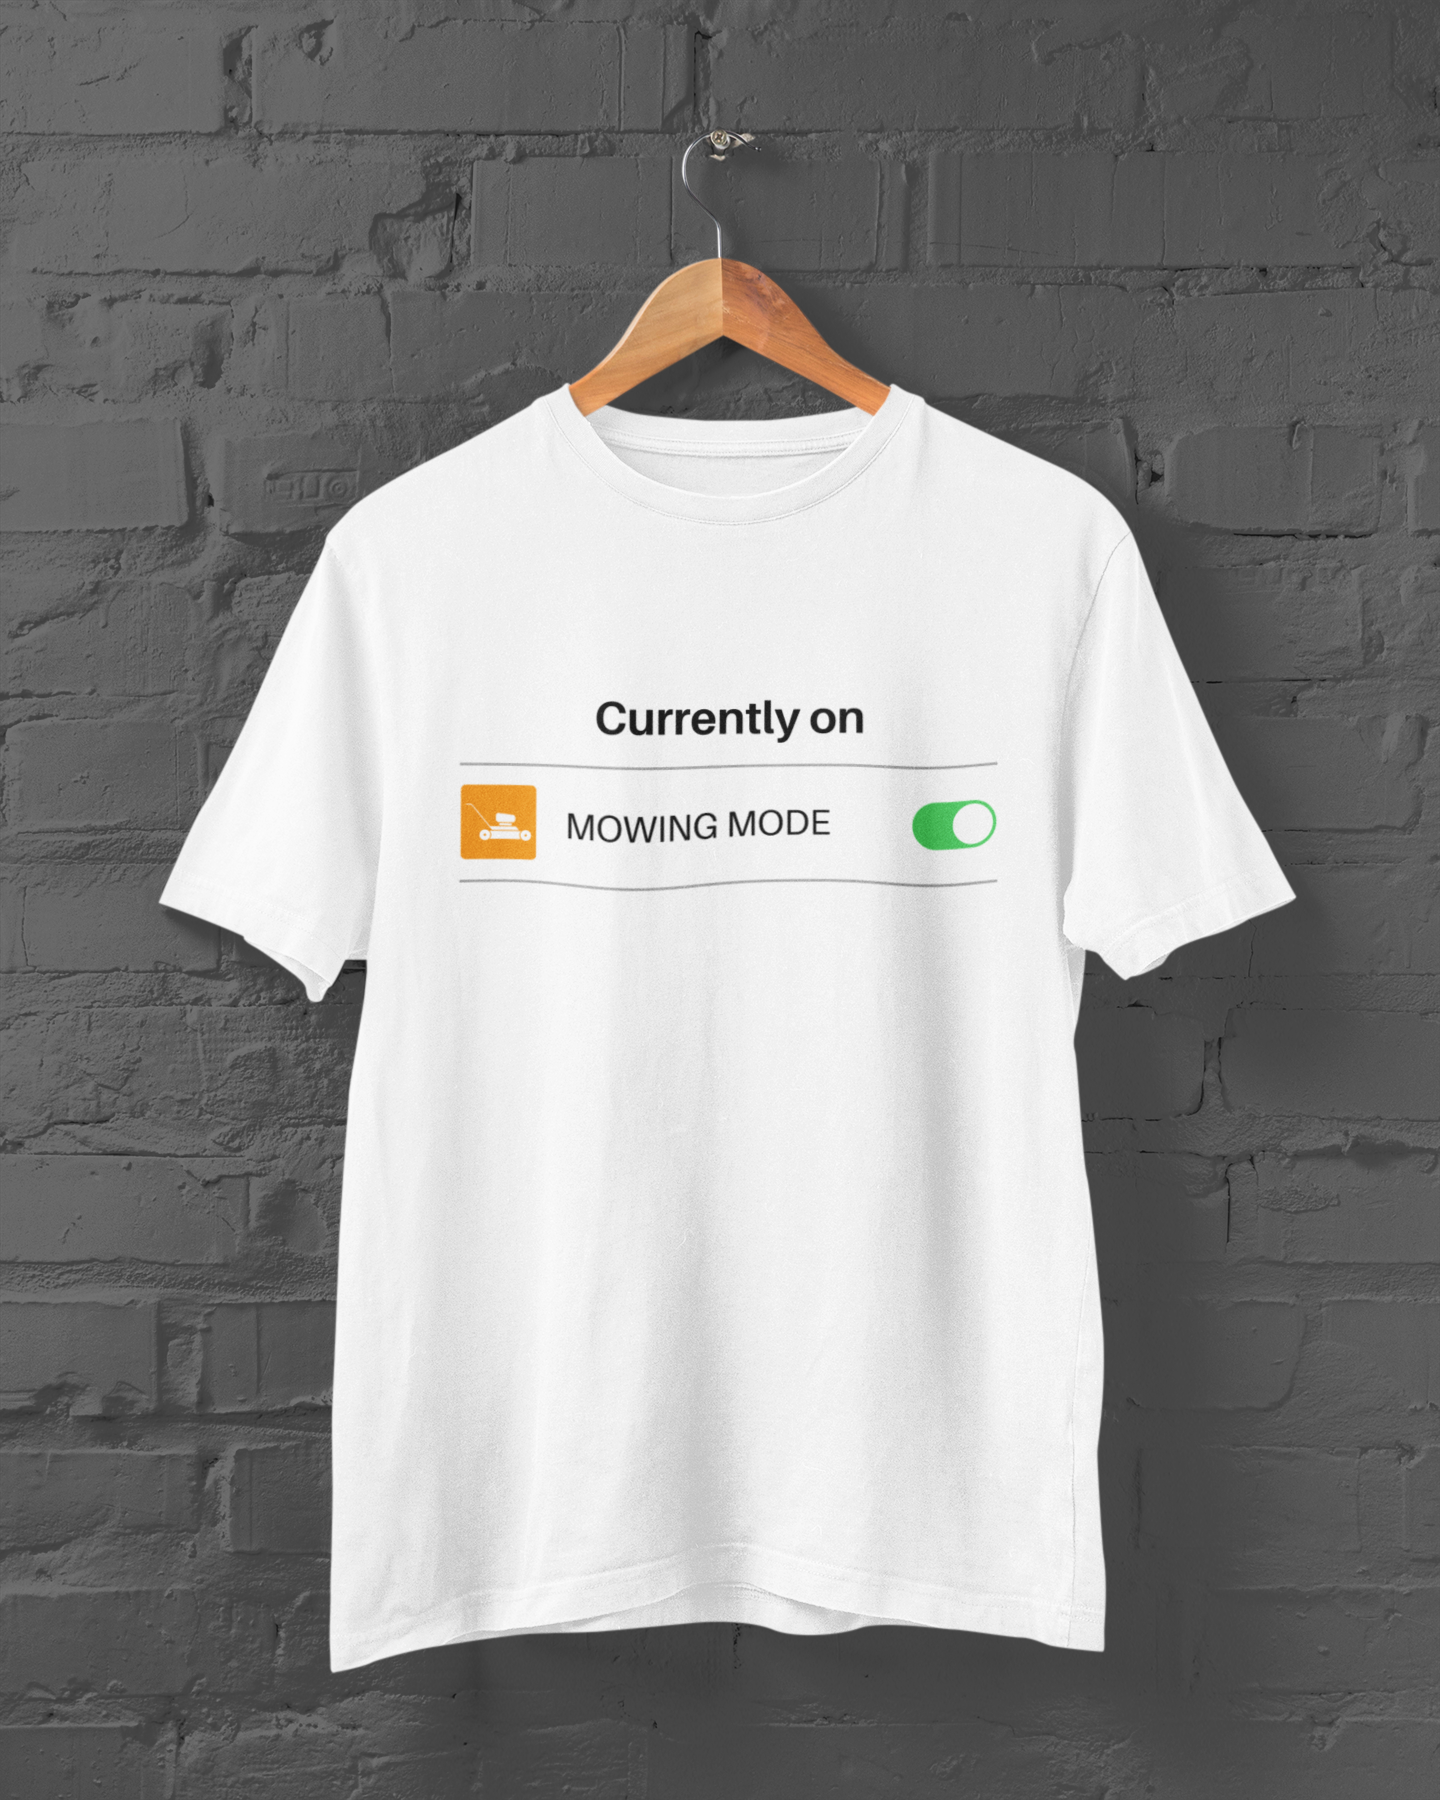 Our mowing mode shirt in the style of a cell phone on/off toggle. This is the perfect shirt for the mowing fanatic, brought to you by Landscaperapparel.com